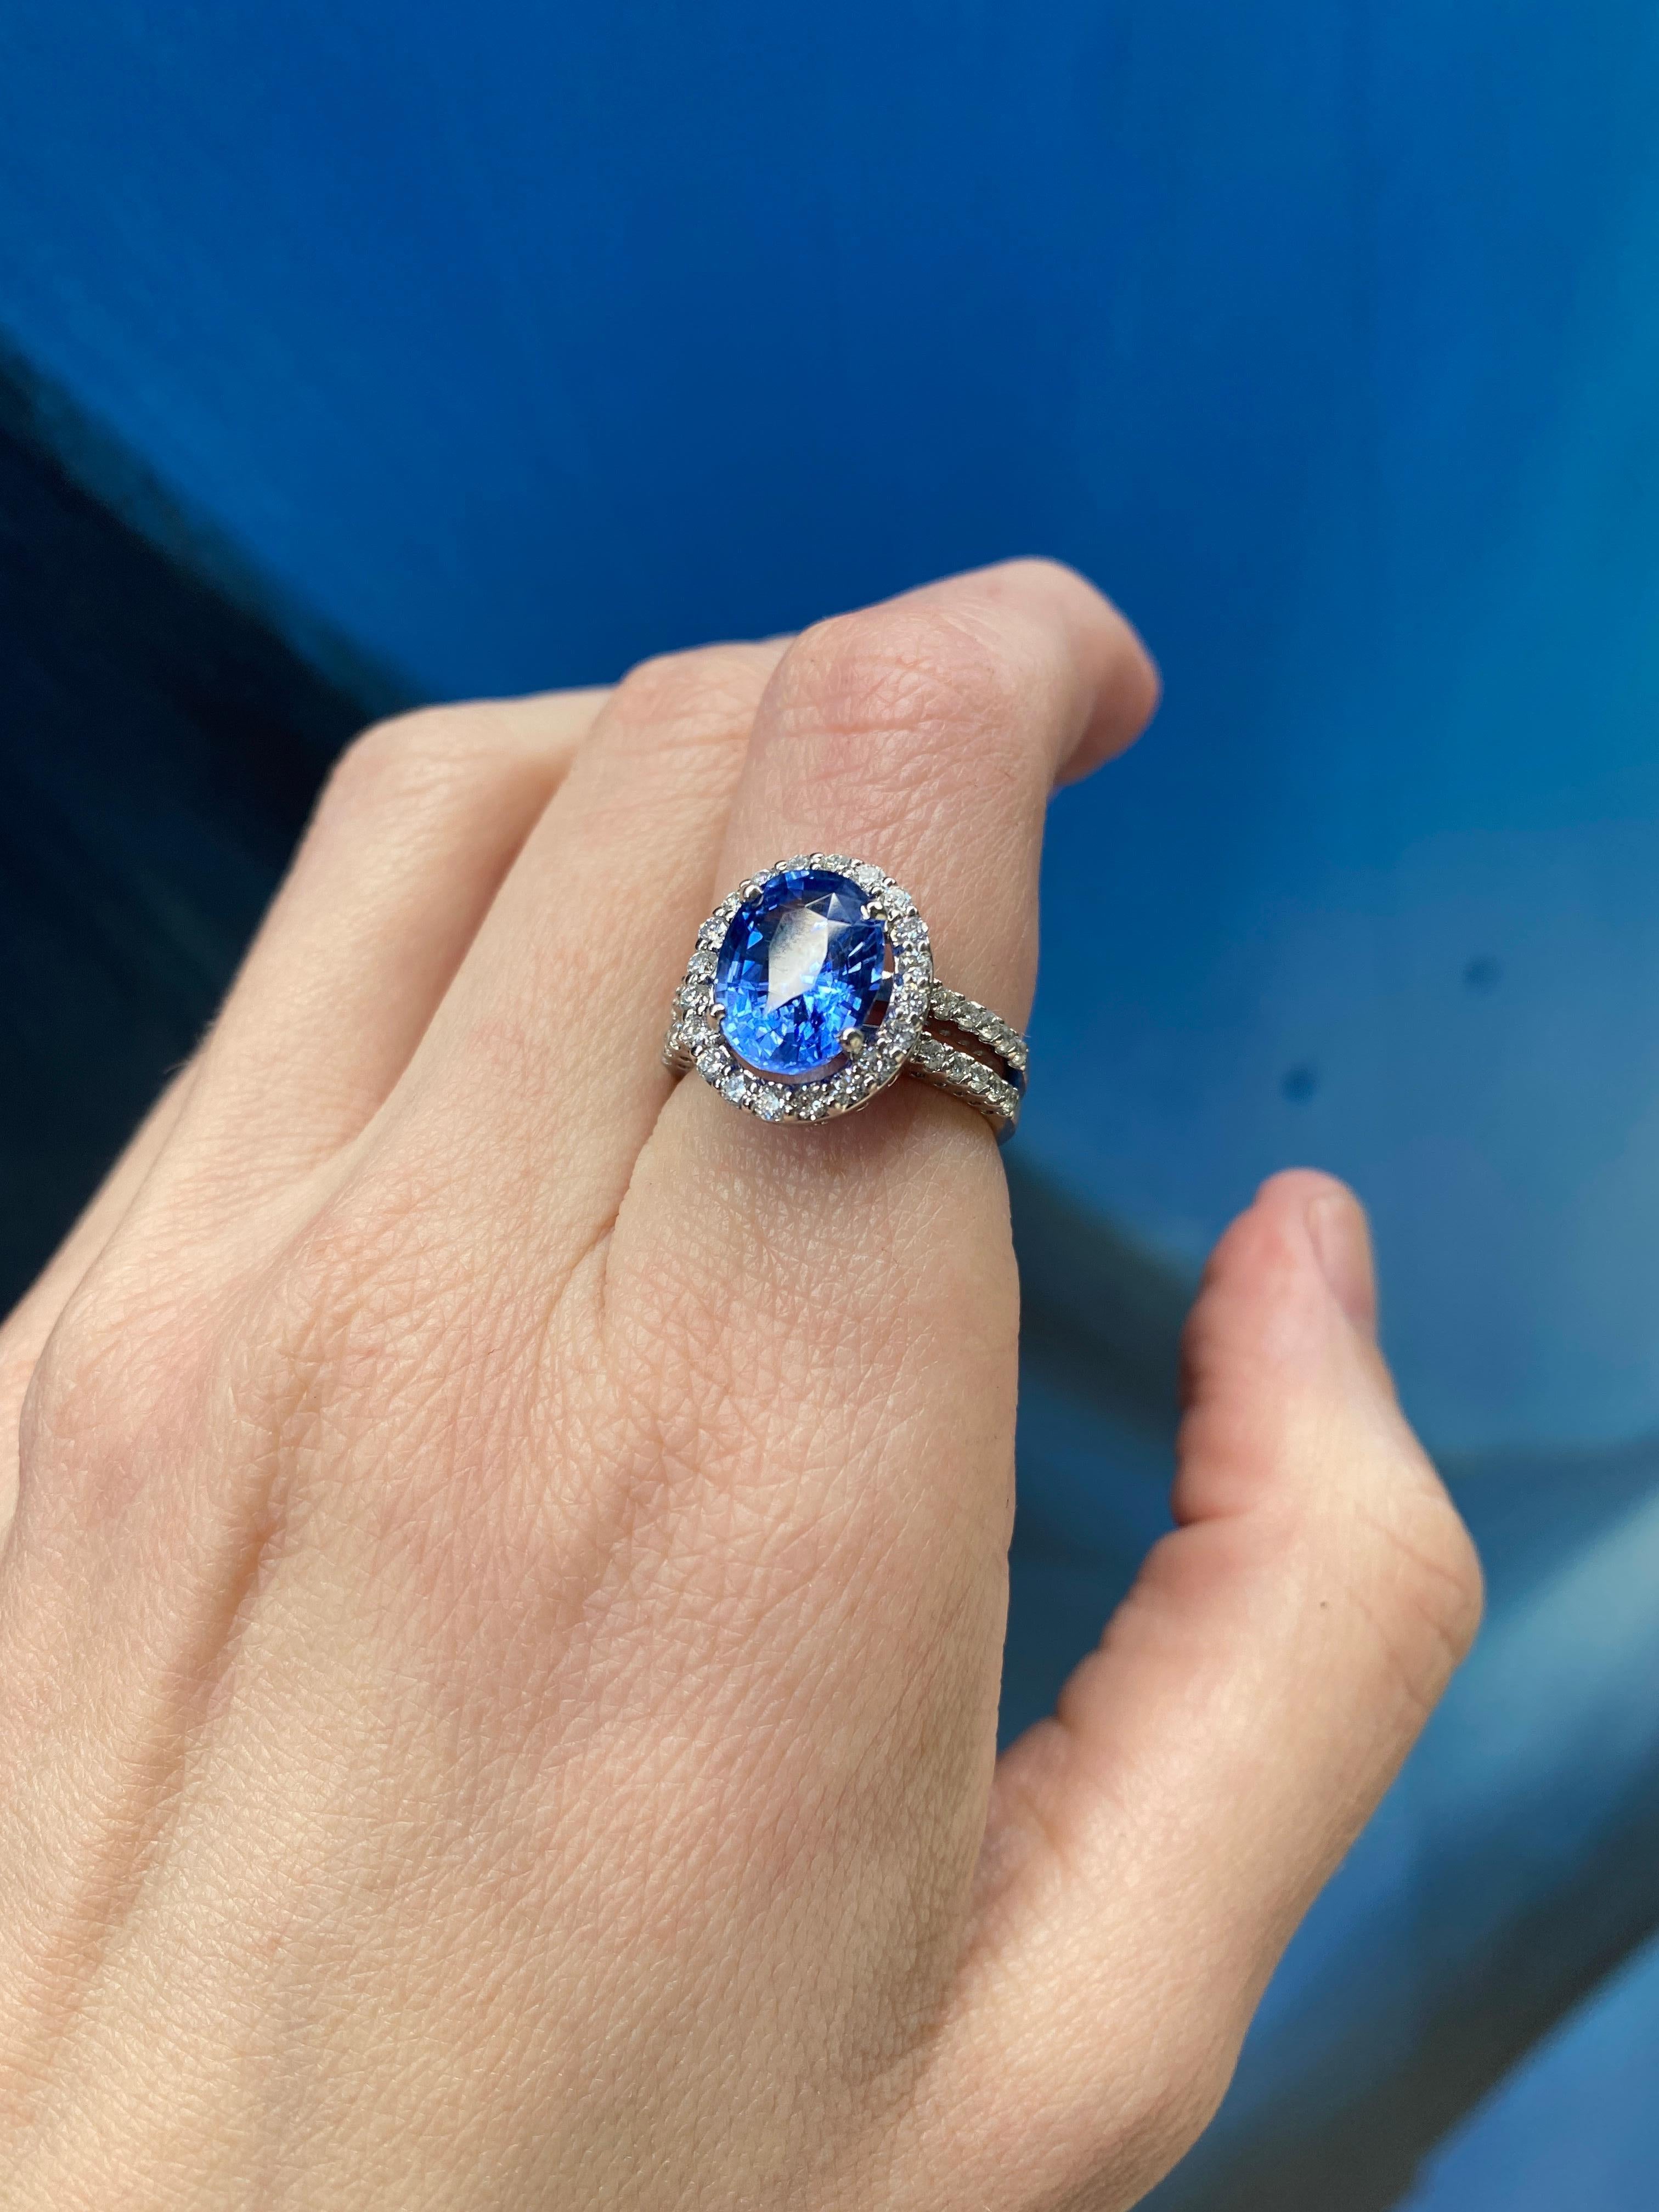 GIA 4.61 Carat Oval Burma Sapphire Ring with 0.73ctw Diamond Halo Cocktail Ring For Sale 2